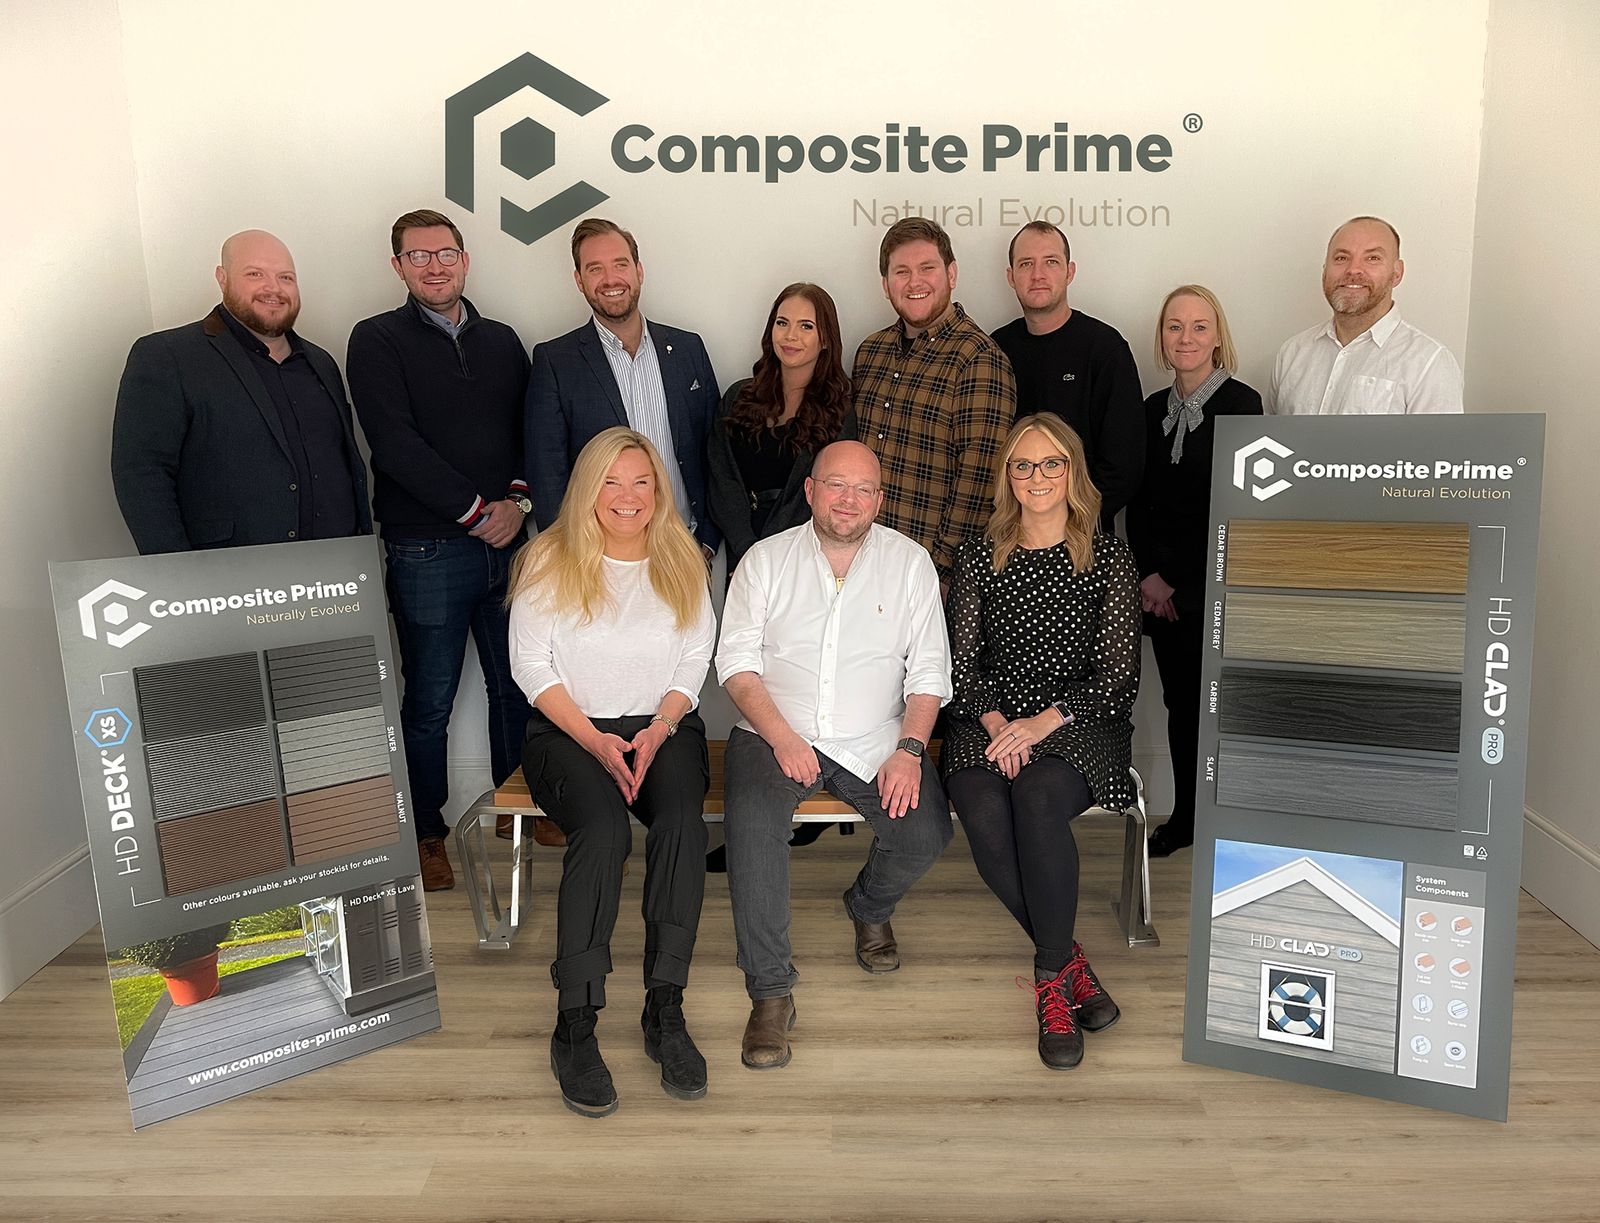 Yorkshire-based Composite Prime reports increase in turnover and USA expansion